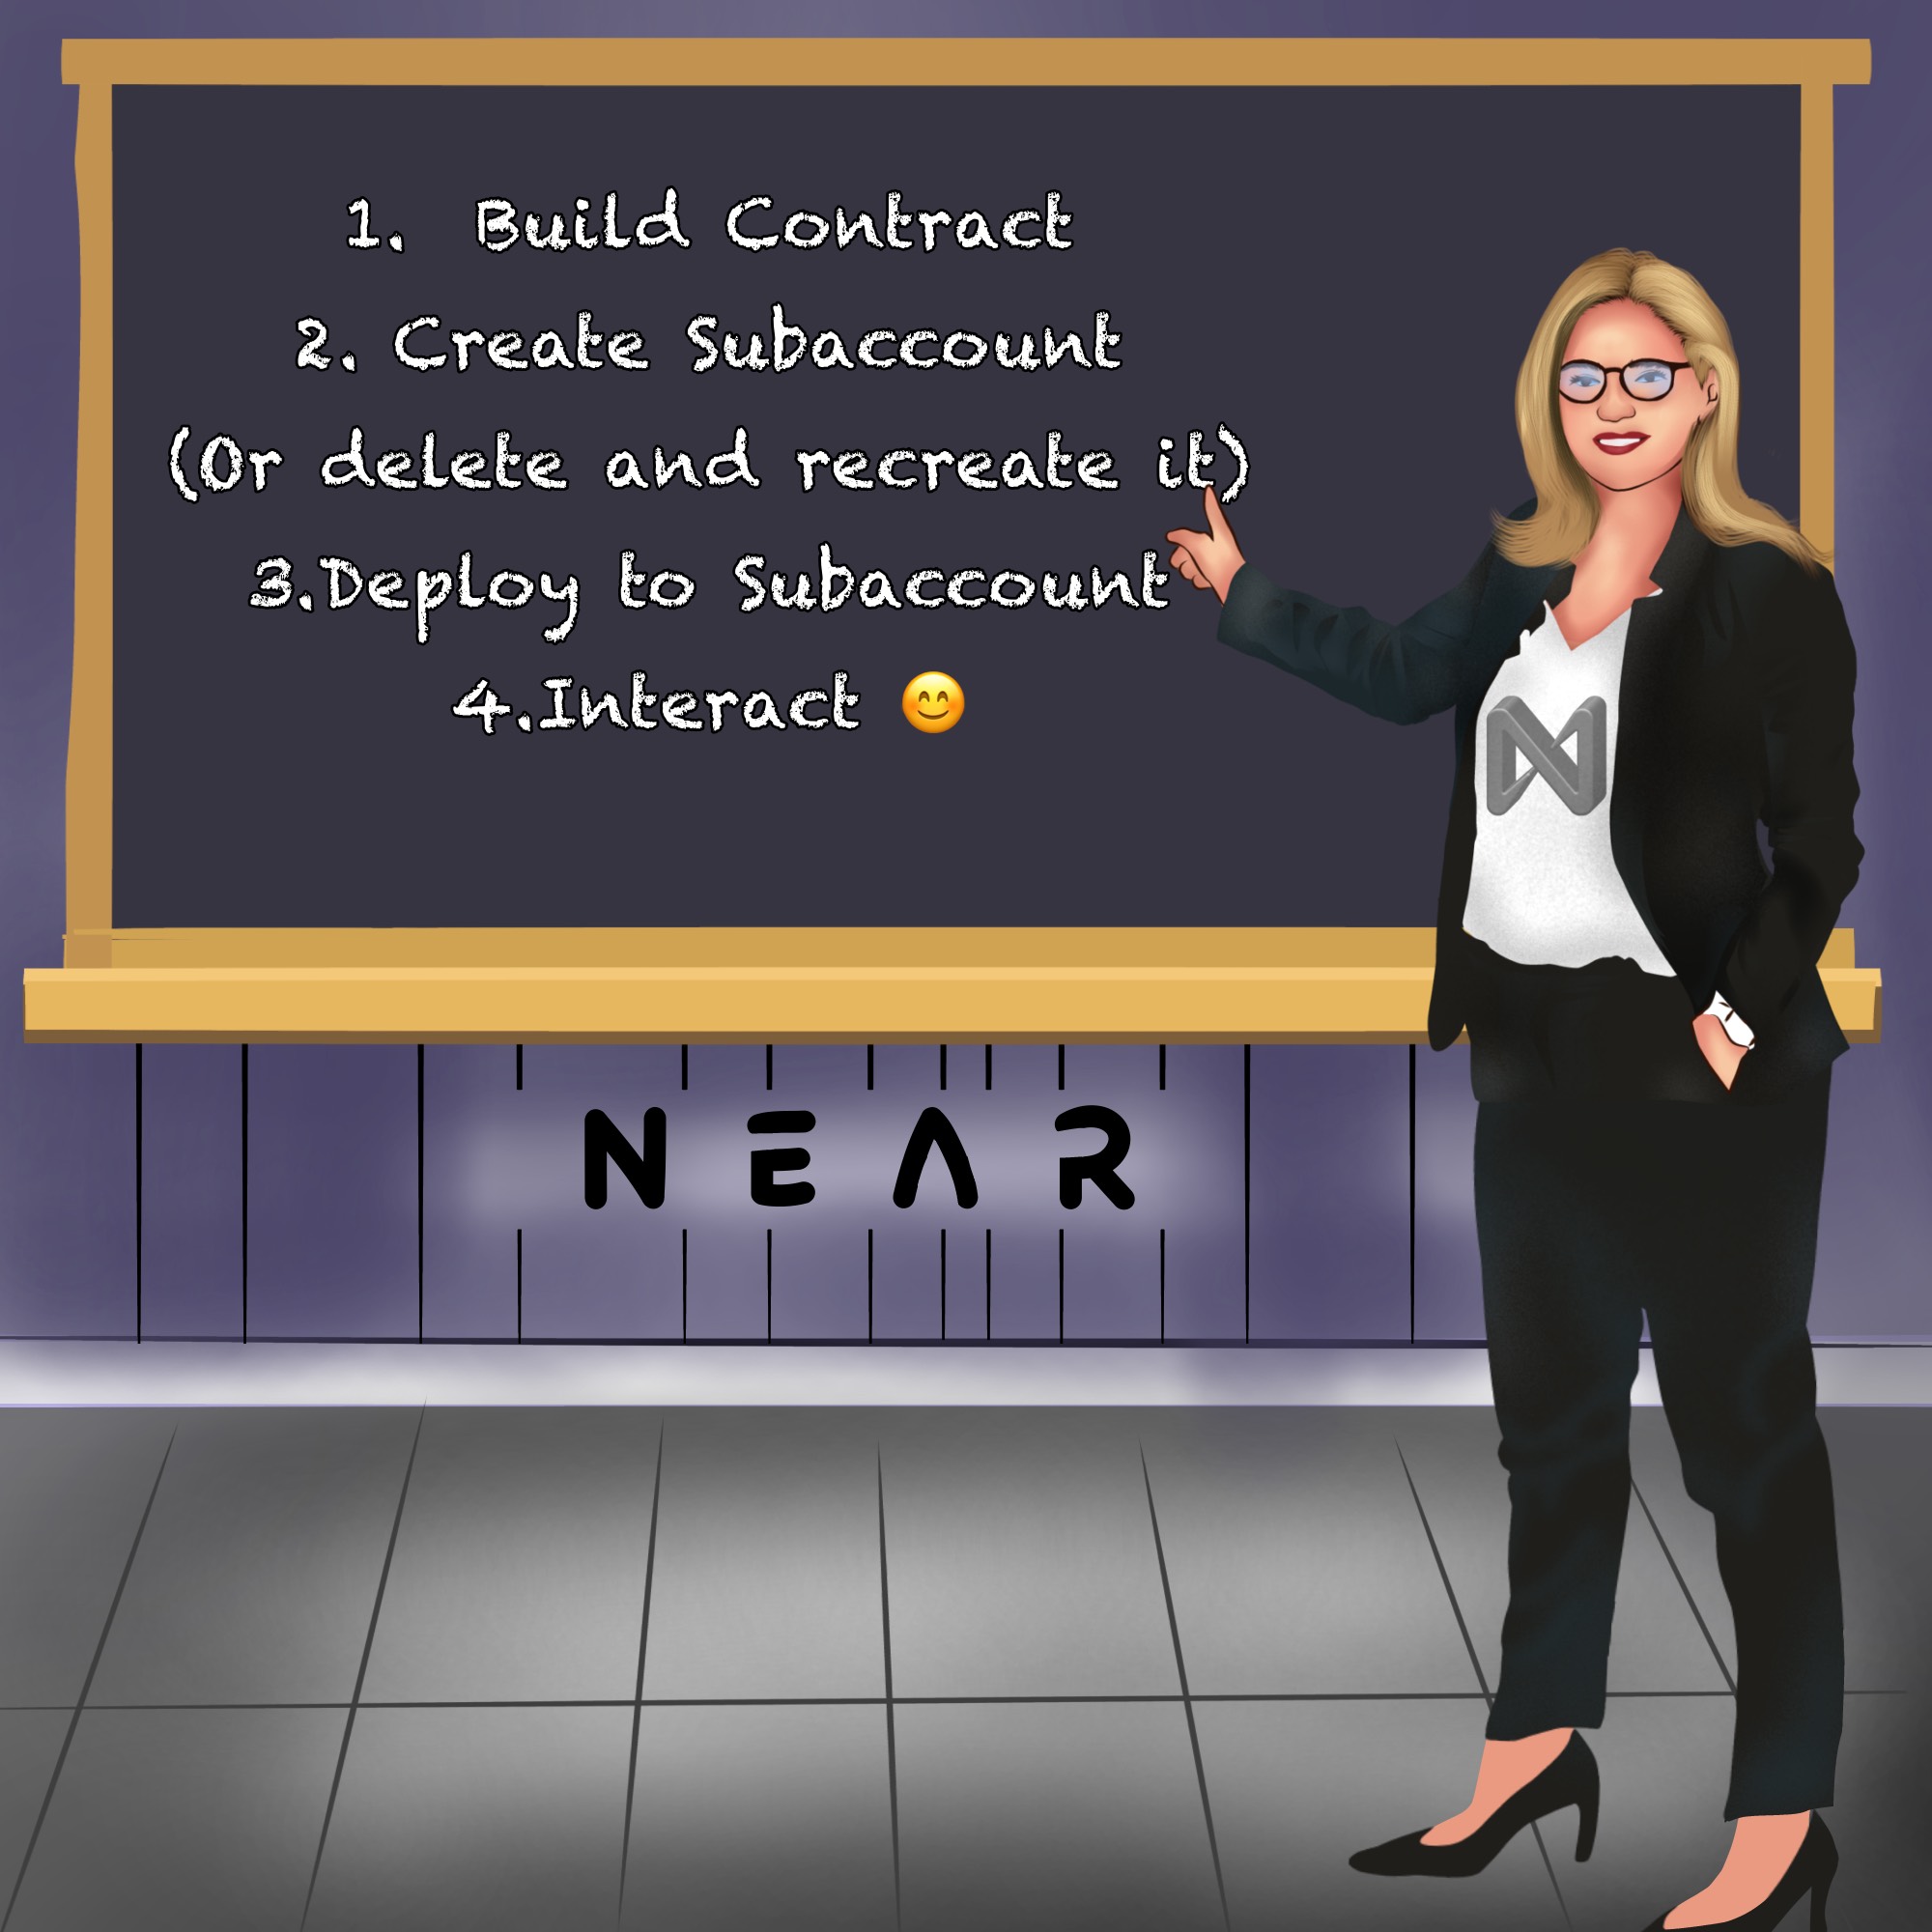 Teacher shows chalkboard with instructions on how to properly deploy a smart contract. 1. Build smart contract. 2. Create a subaccount (or delete and recreate if it exists) 3. Deploy to subaccount. 4. Interact. Art created by herogranada.near